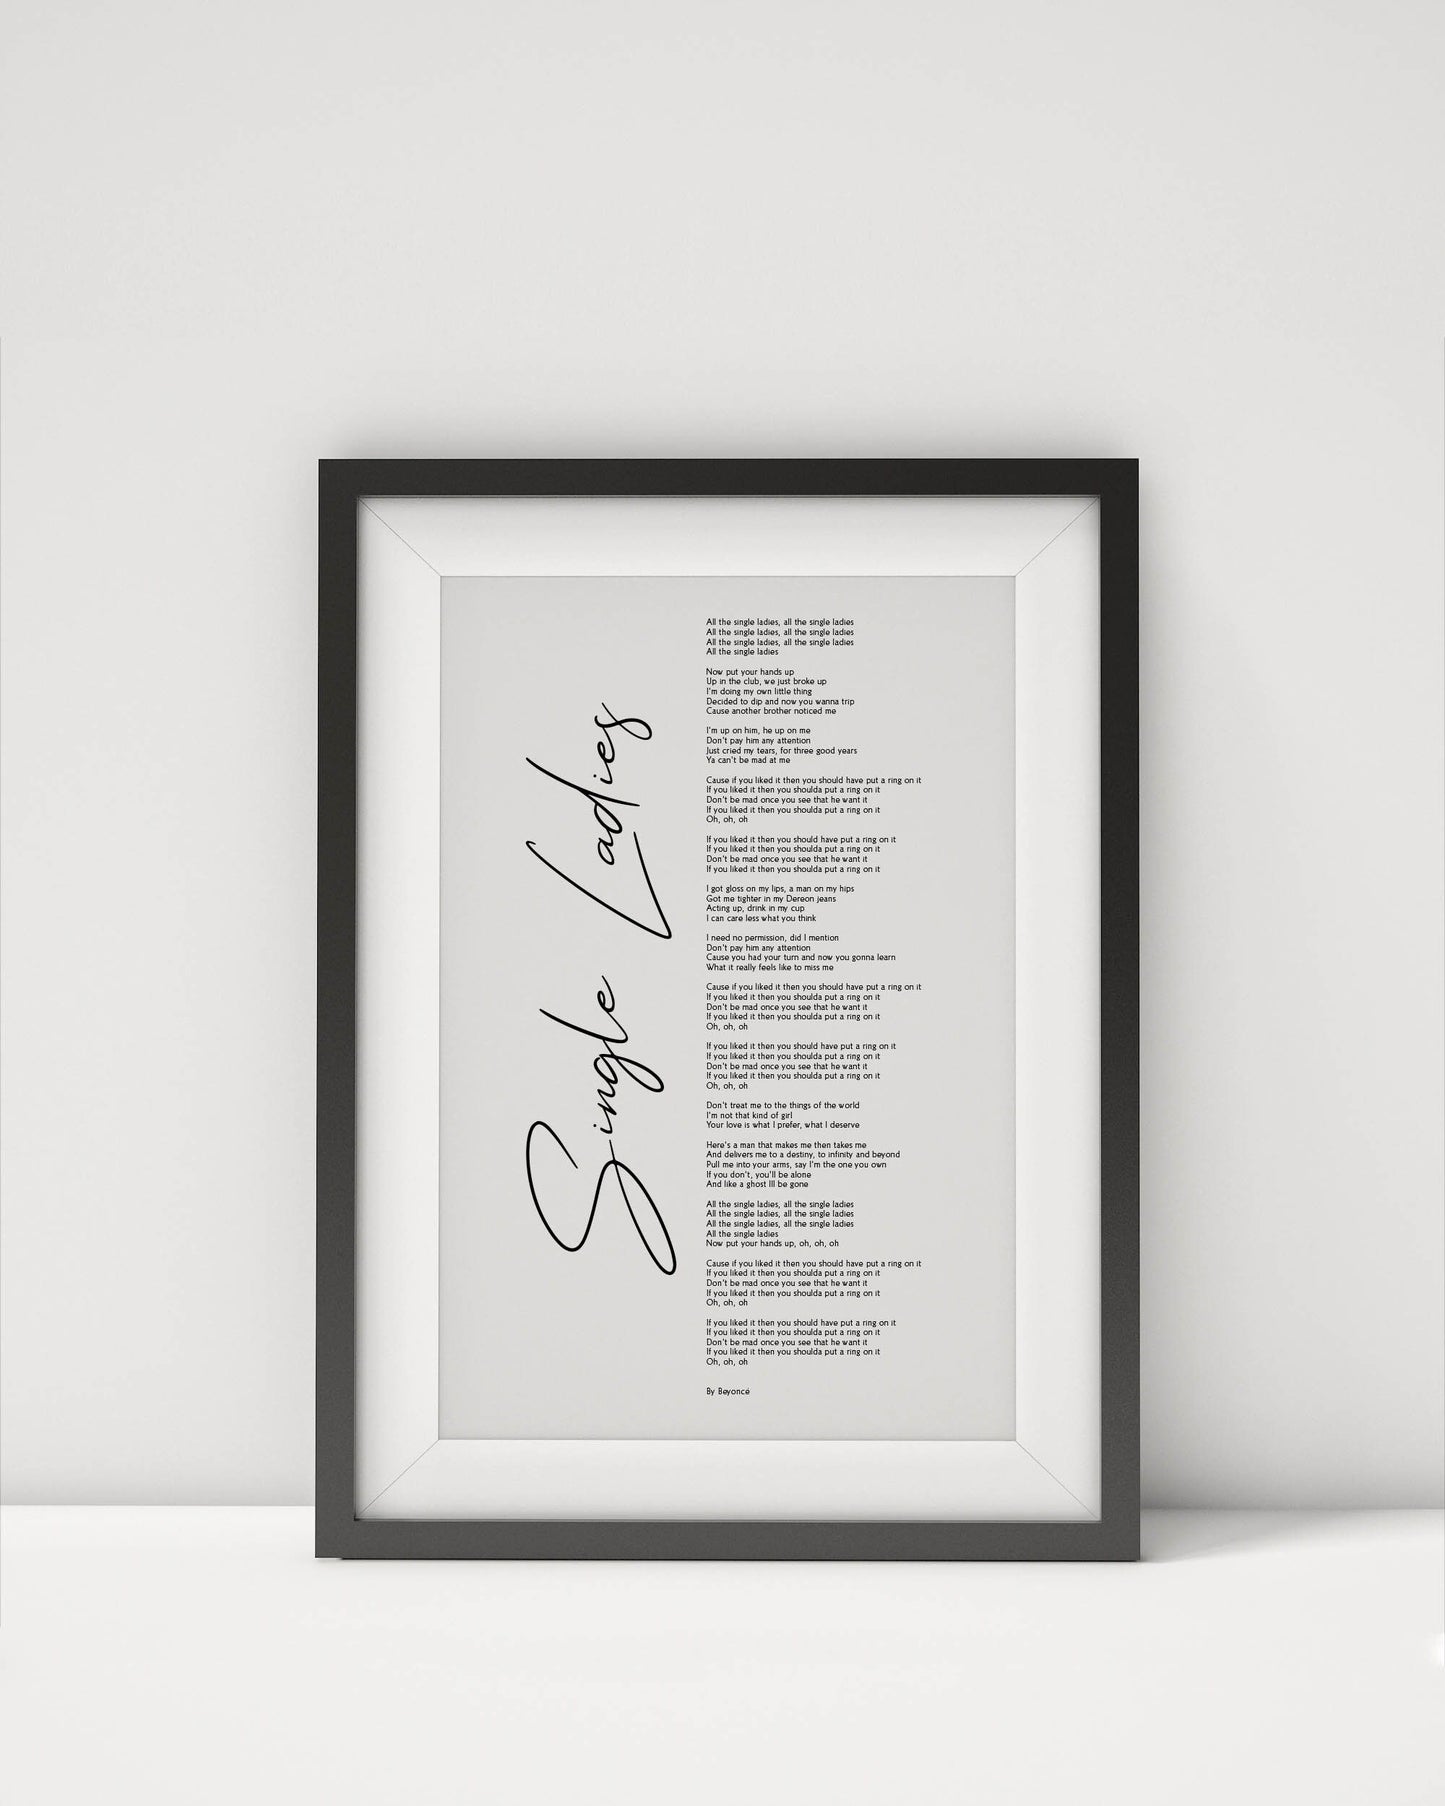 Single Ladies - Put a ring on it by Beyonce Print Framed - Beyonce Lyrics Print - Single Ladies Song Poster Print Framed - Put a ring on it